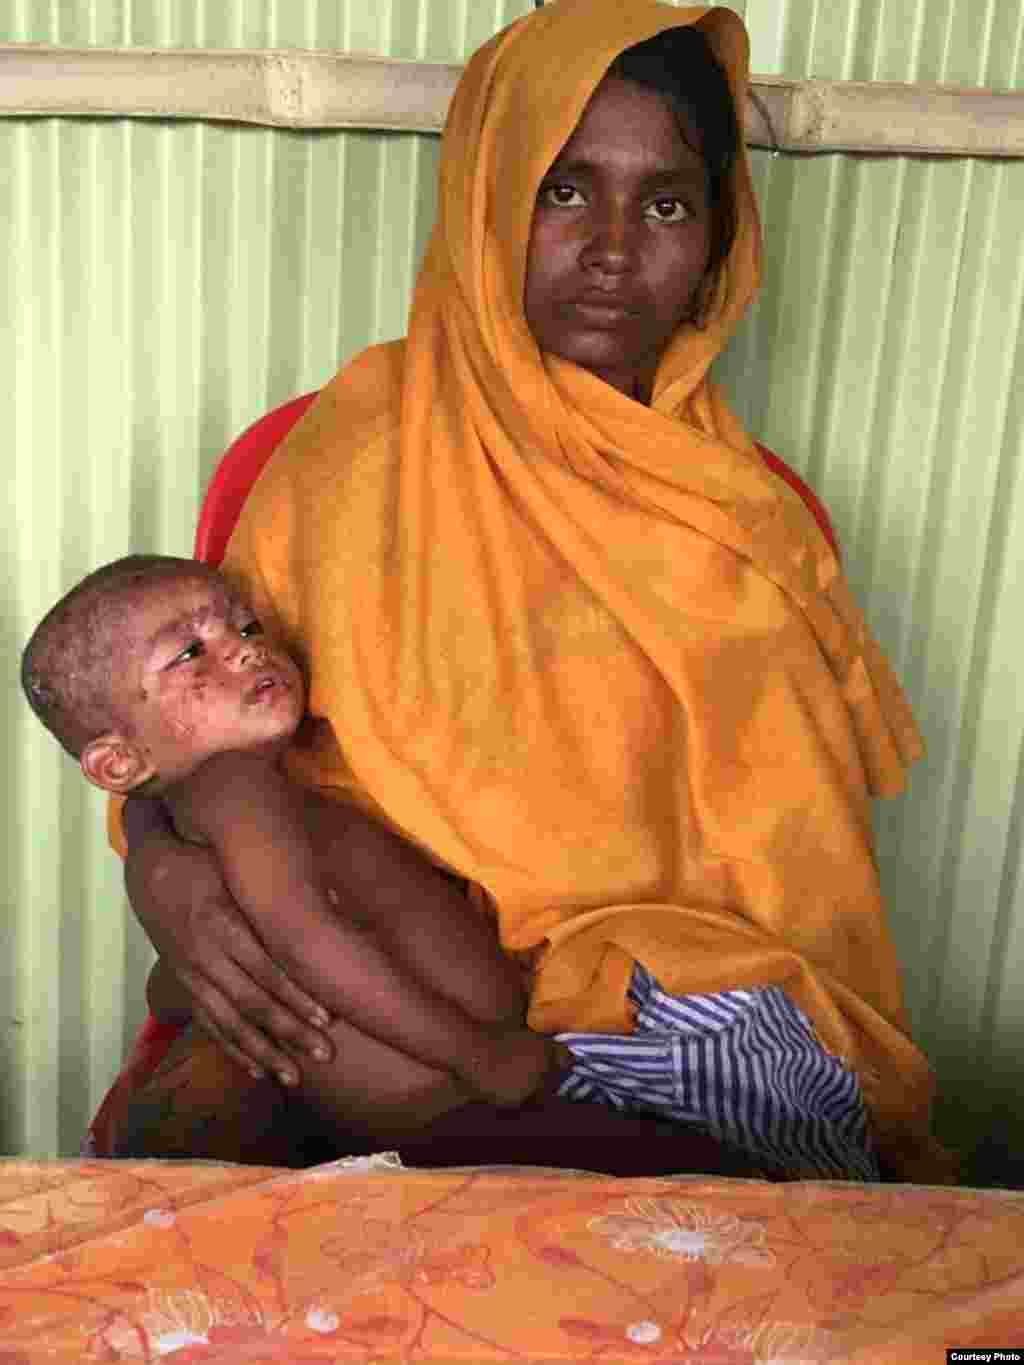 A woman holds a sick child at a Rohingya refugee camp in Bangladesh. (Photo courtesy of Dr. Imran Akbar)